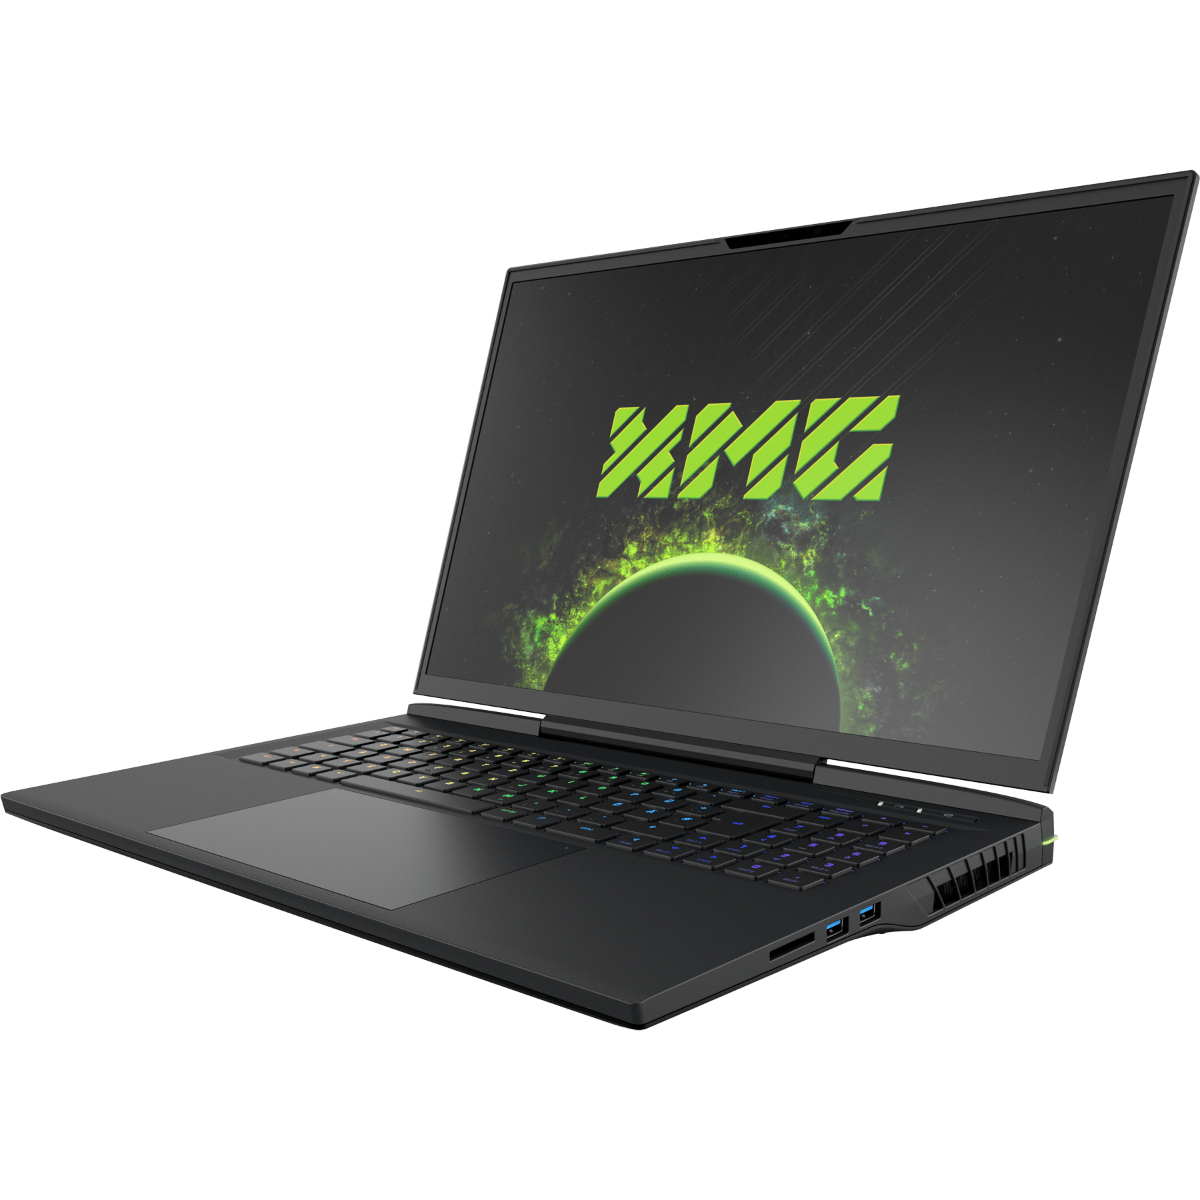 schenker-xmg-neo-17-m22-in-review-high-performance-gaming-laptop-with-mechanical-cherry-mx-keys